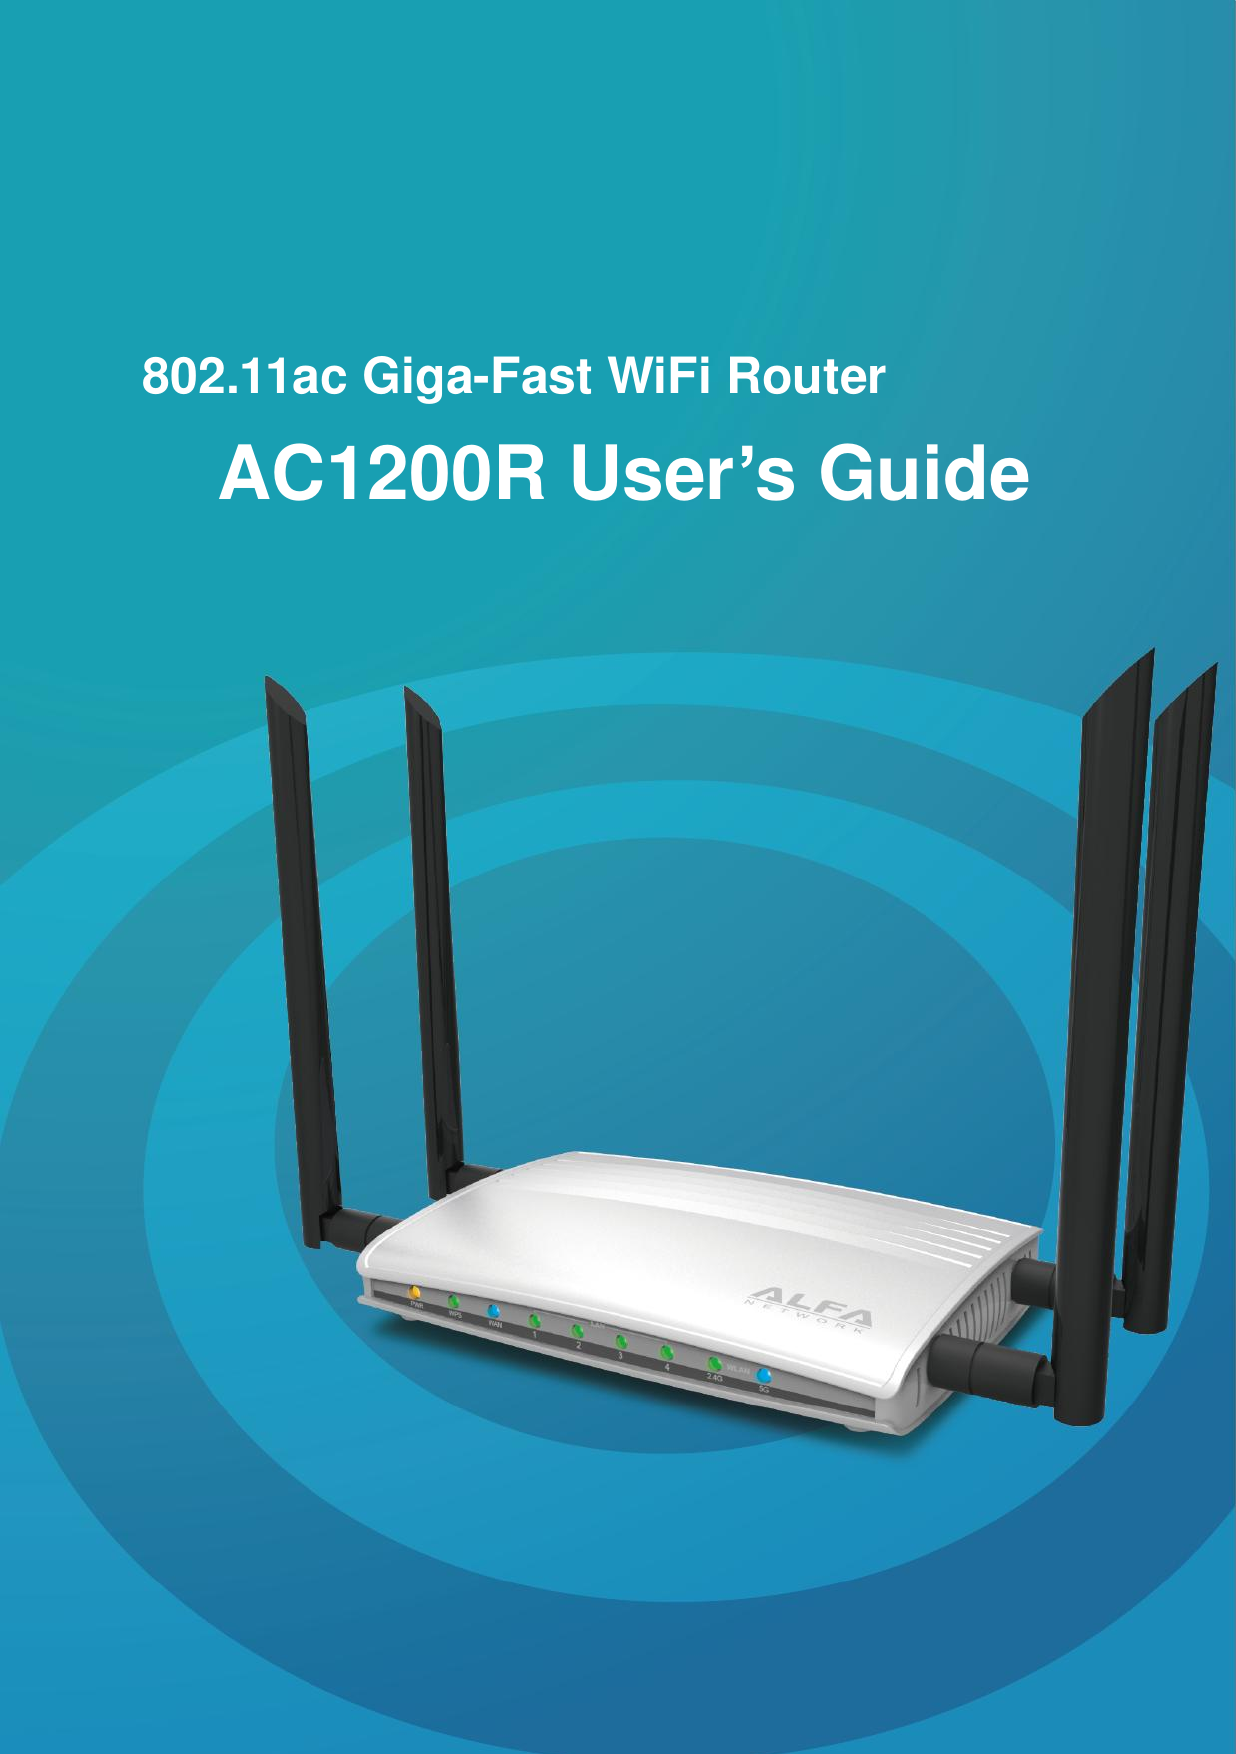    802.11ac Giga-Fast WiFi Router                         AC1200R User’s Guide 